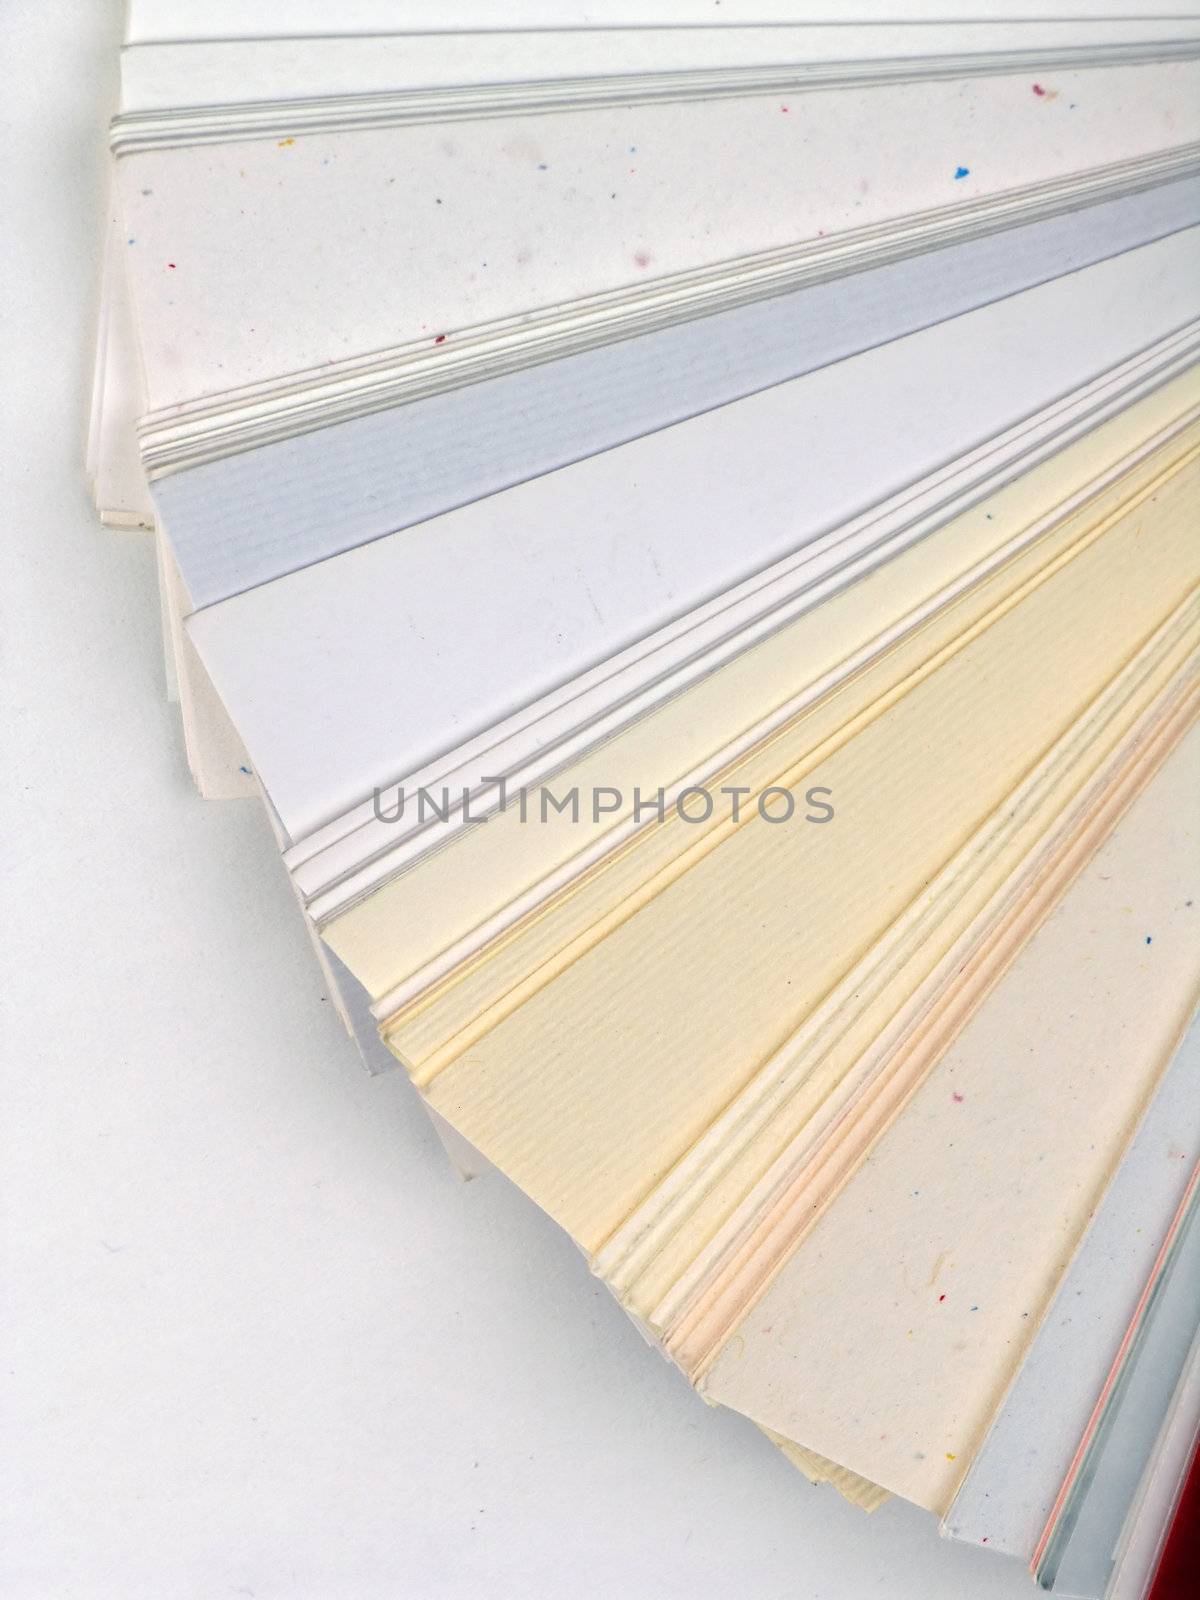 Colored samples of different papers on white background, business cards